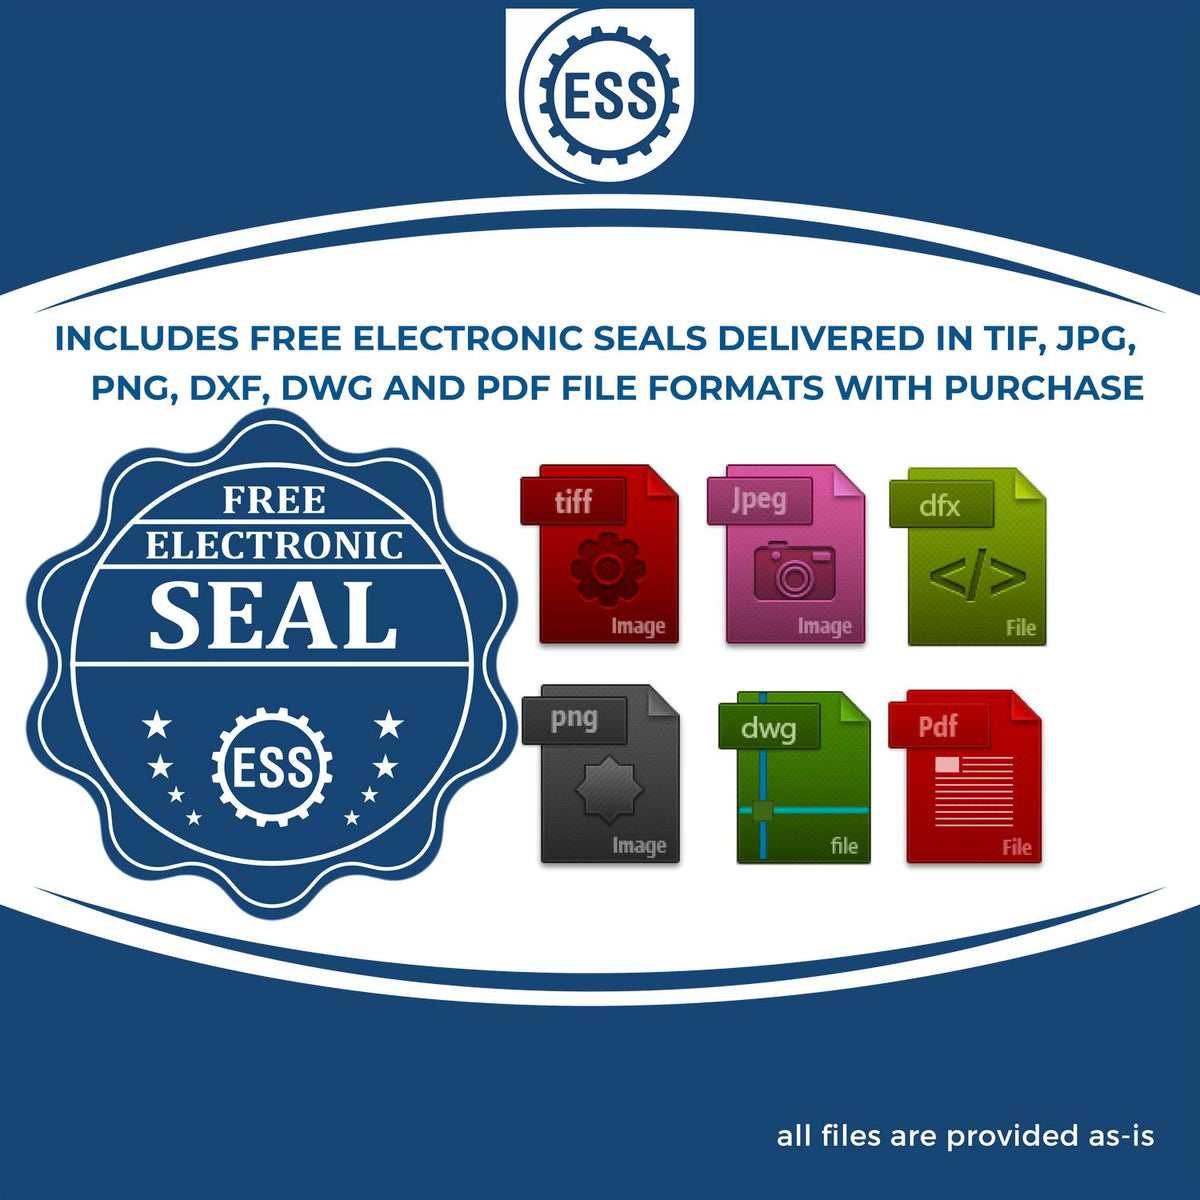 An infographic for the free electronic seal for the Hybrid Nevada Architect Seal illustrating the different file type icons such as DXF, DWG, TIF, JPG and PNG.